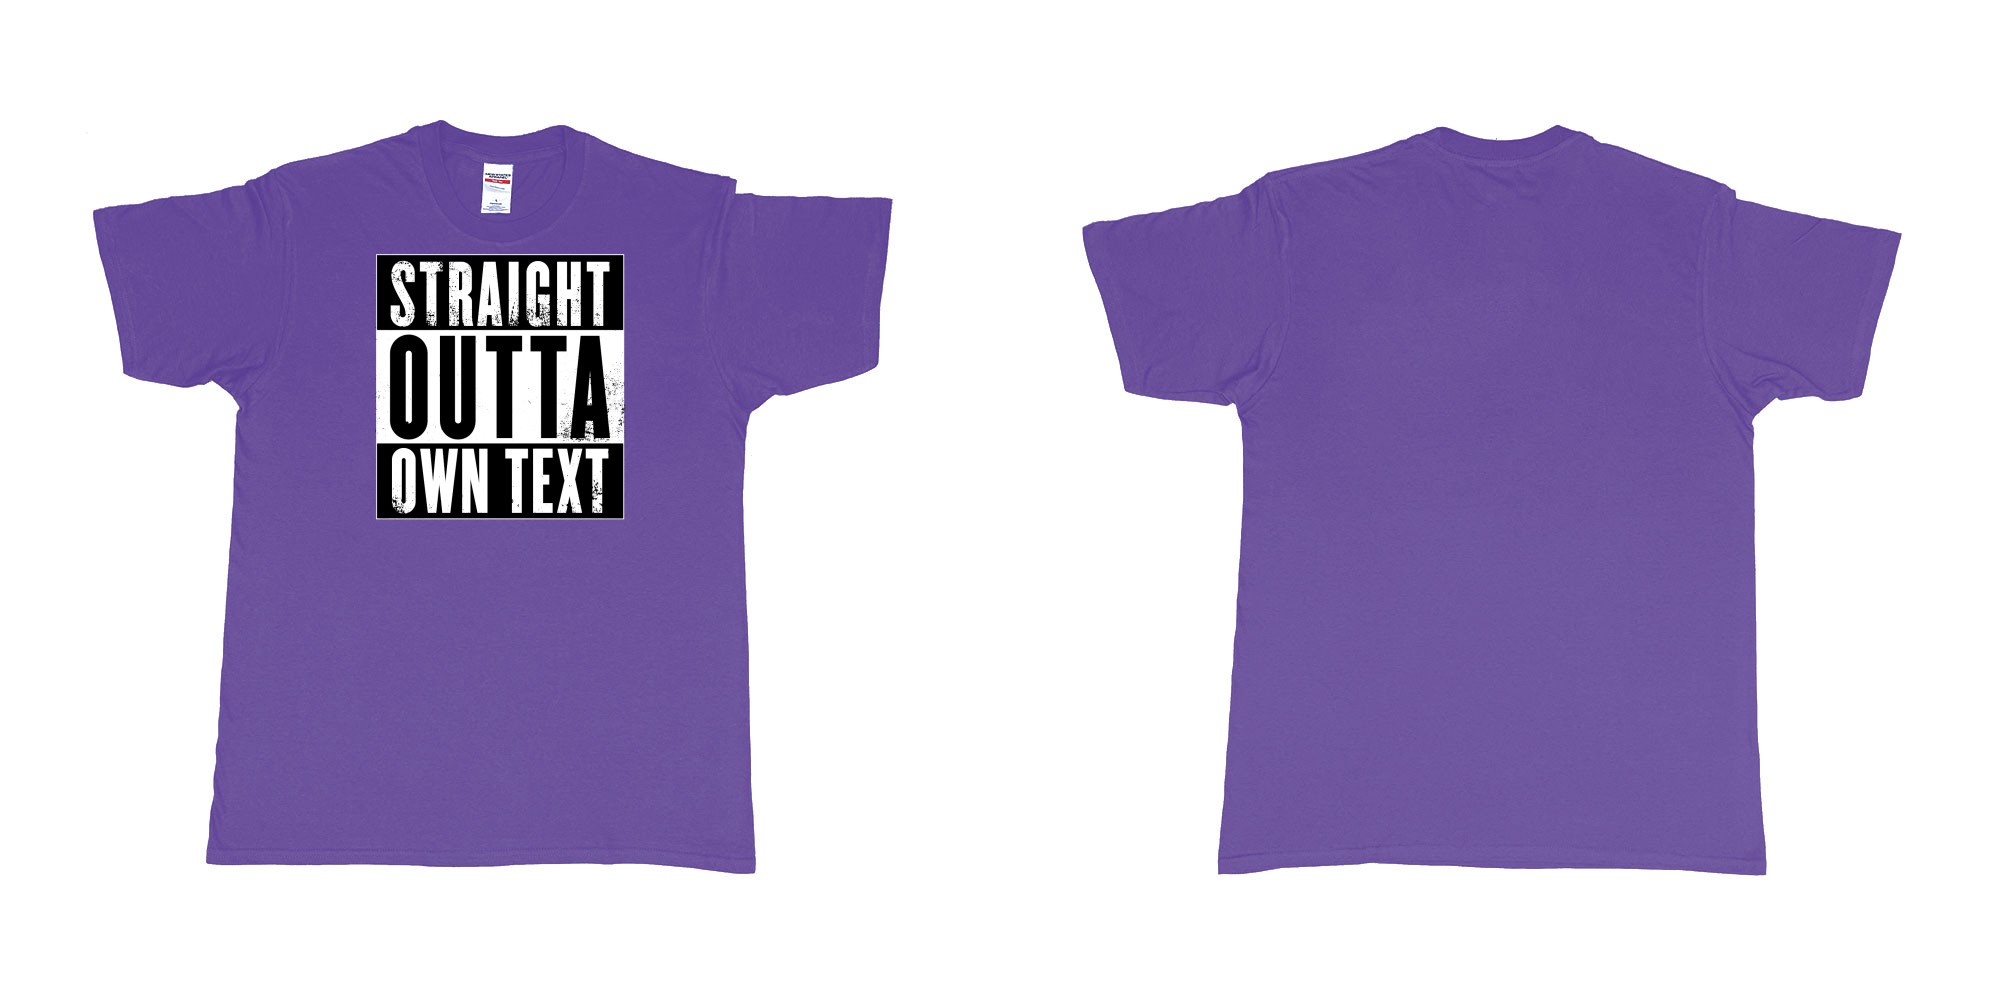 Custom tshirt design Straight Outta Compton in fabric color purple choice your own text made in Bali by The Pirate Way